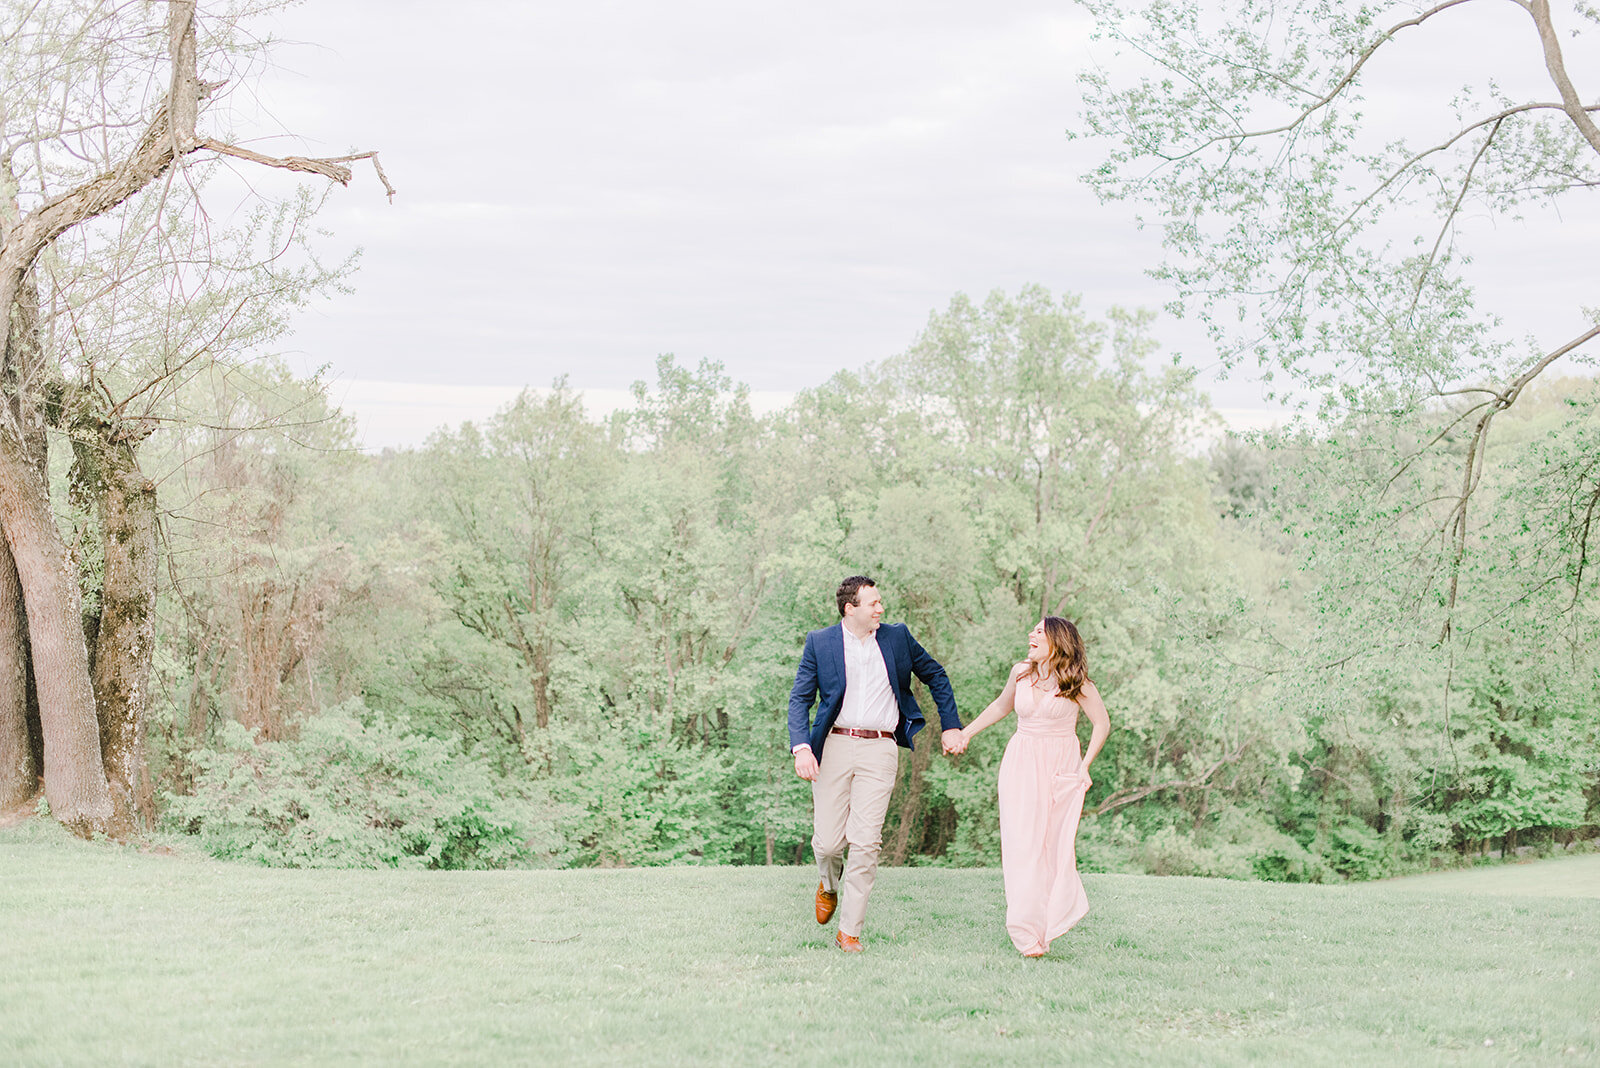 This lovely engagement session features Pittsburgh wedding venue, Hartwood Acres Mansion and the charming Ritter’s diner. Photographed by Morgan Taylor Artistry.